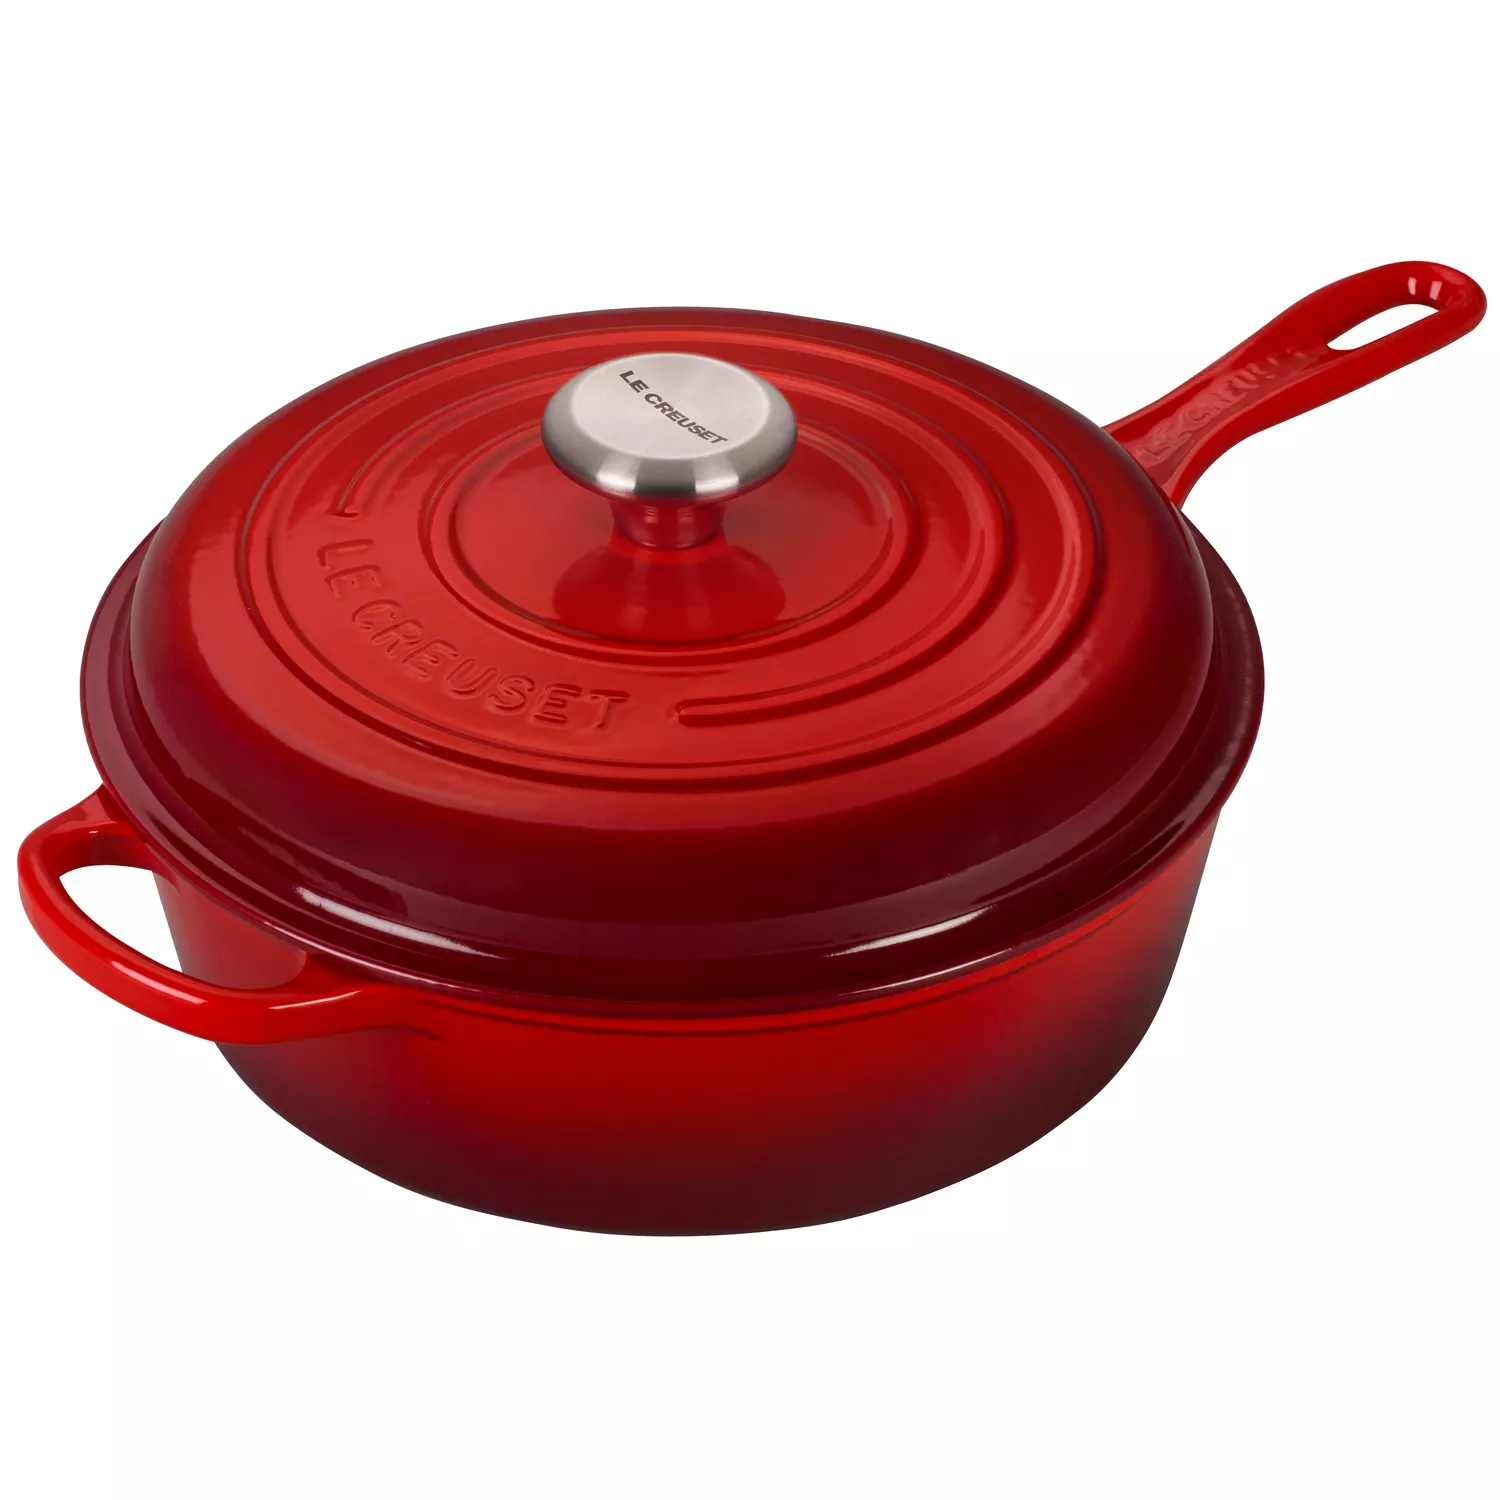 Le Creuset Chef's Oven with Copper Knob - 7.5-qt Cherry Red